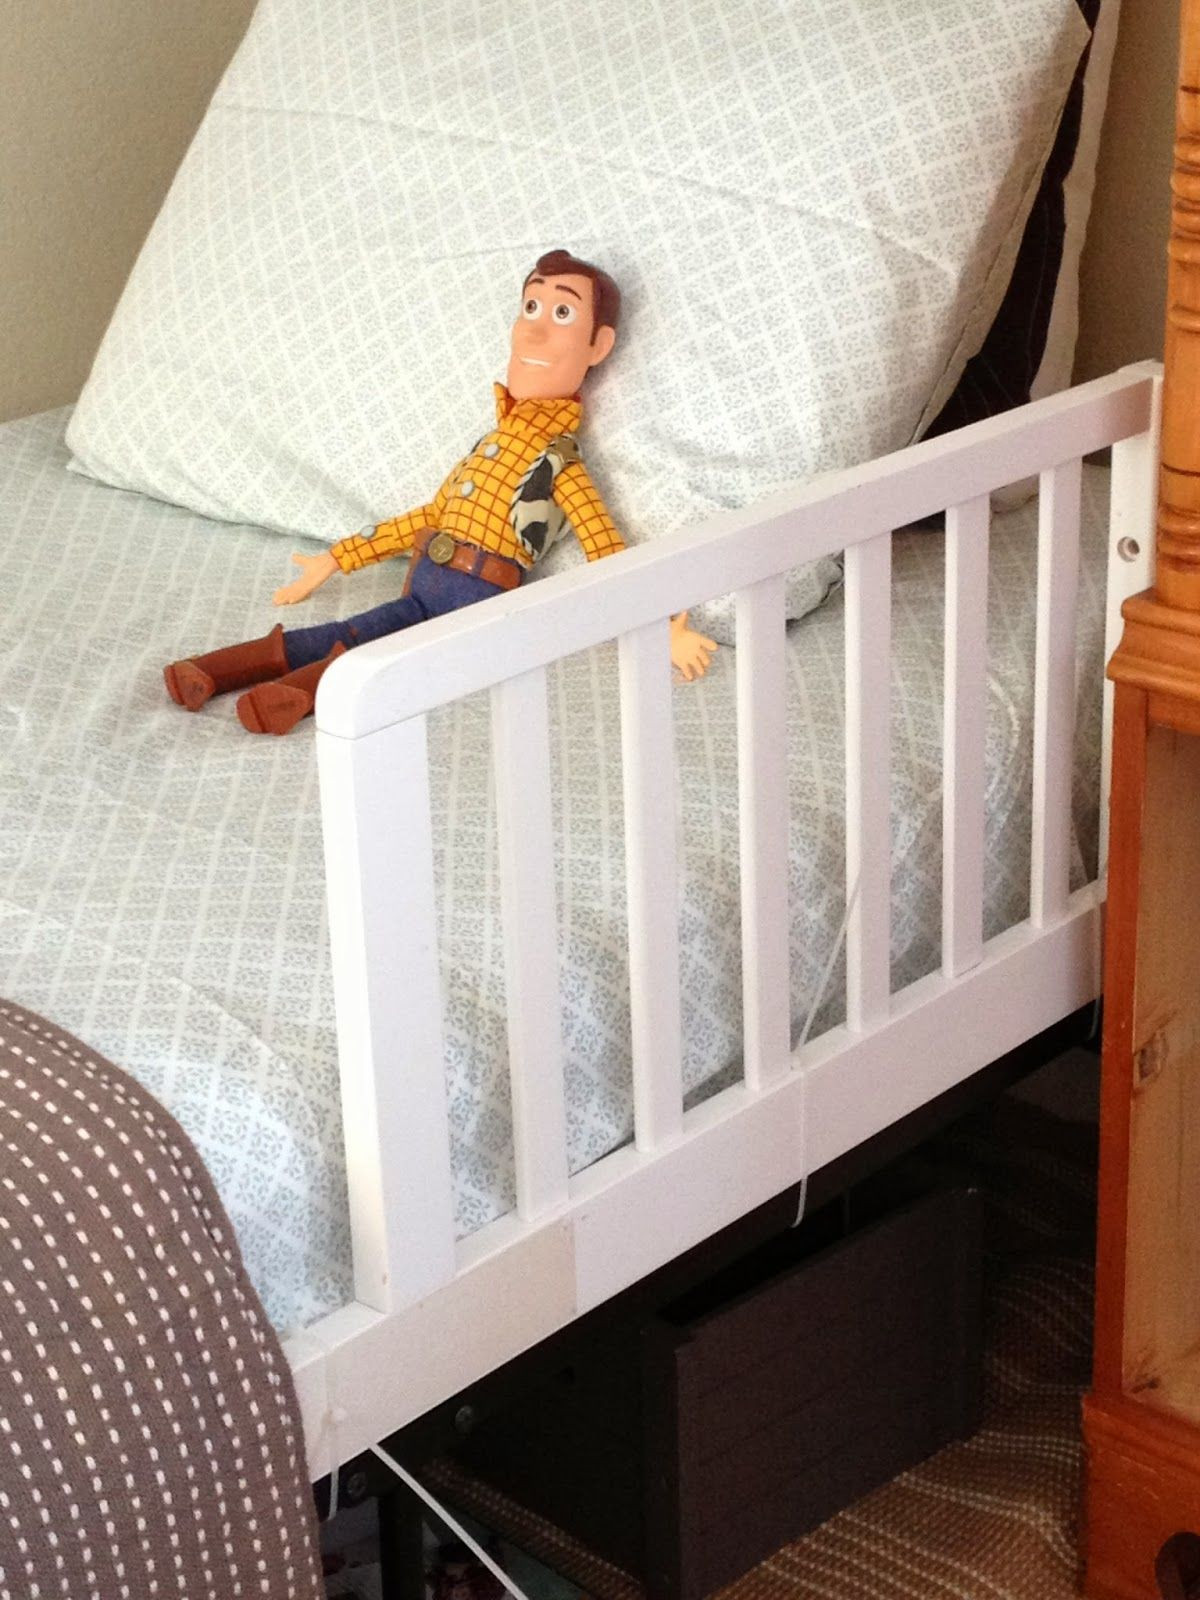 DIY Bed Rails For Toddlers
 Diy safety rail for a toddler bed